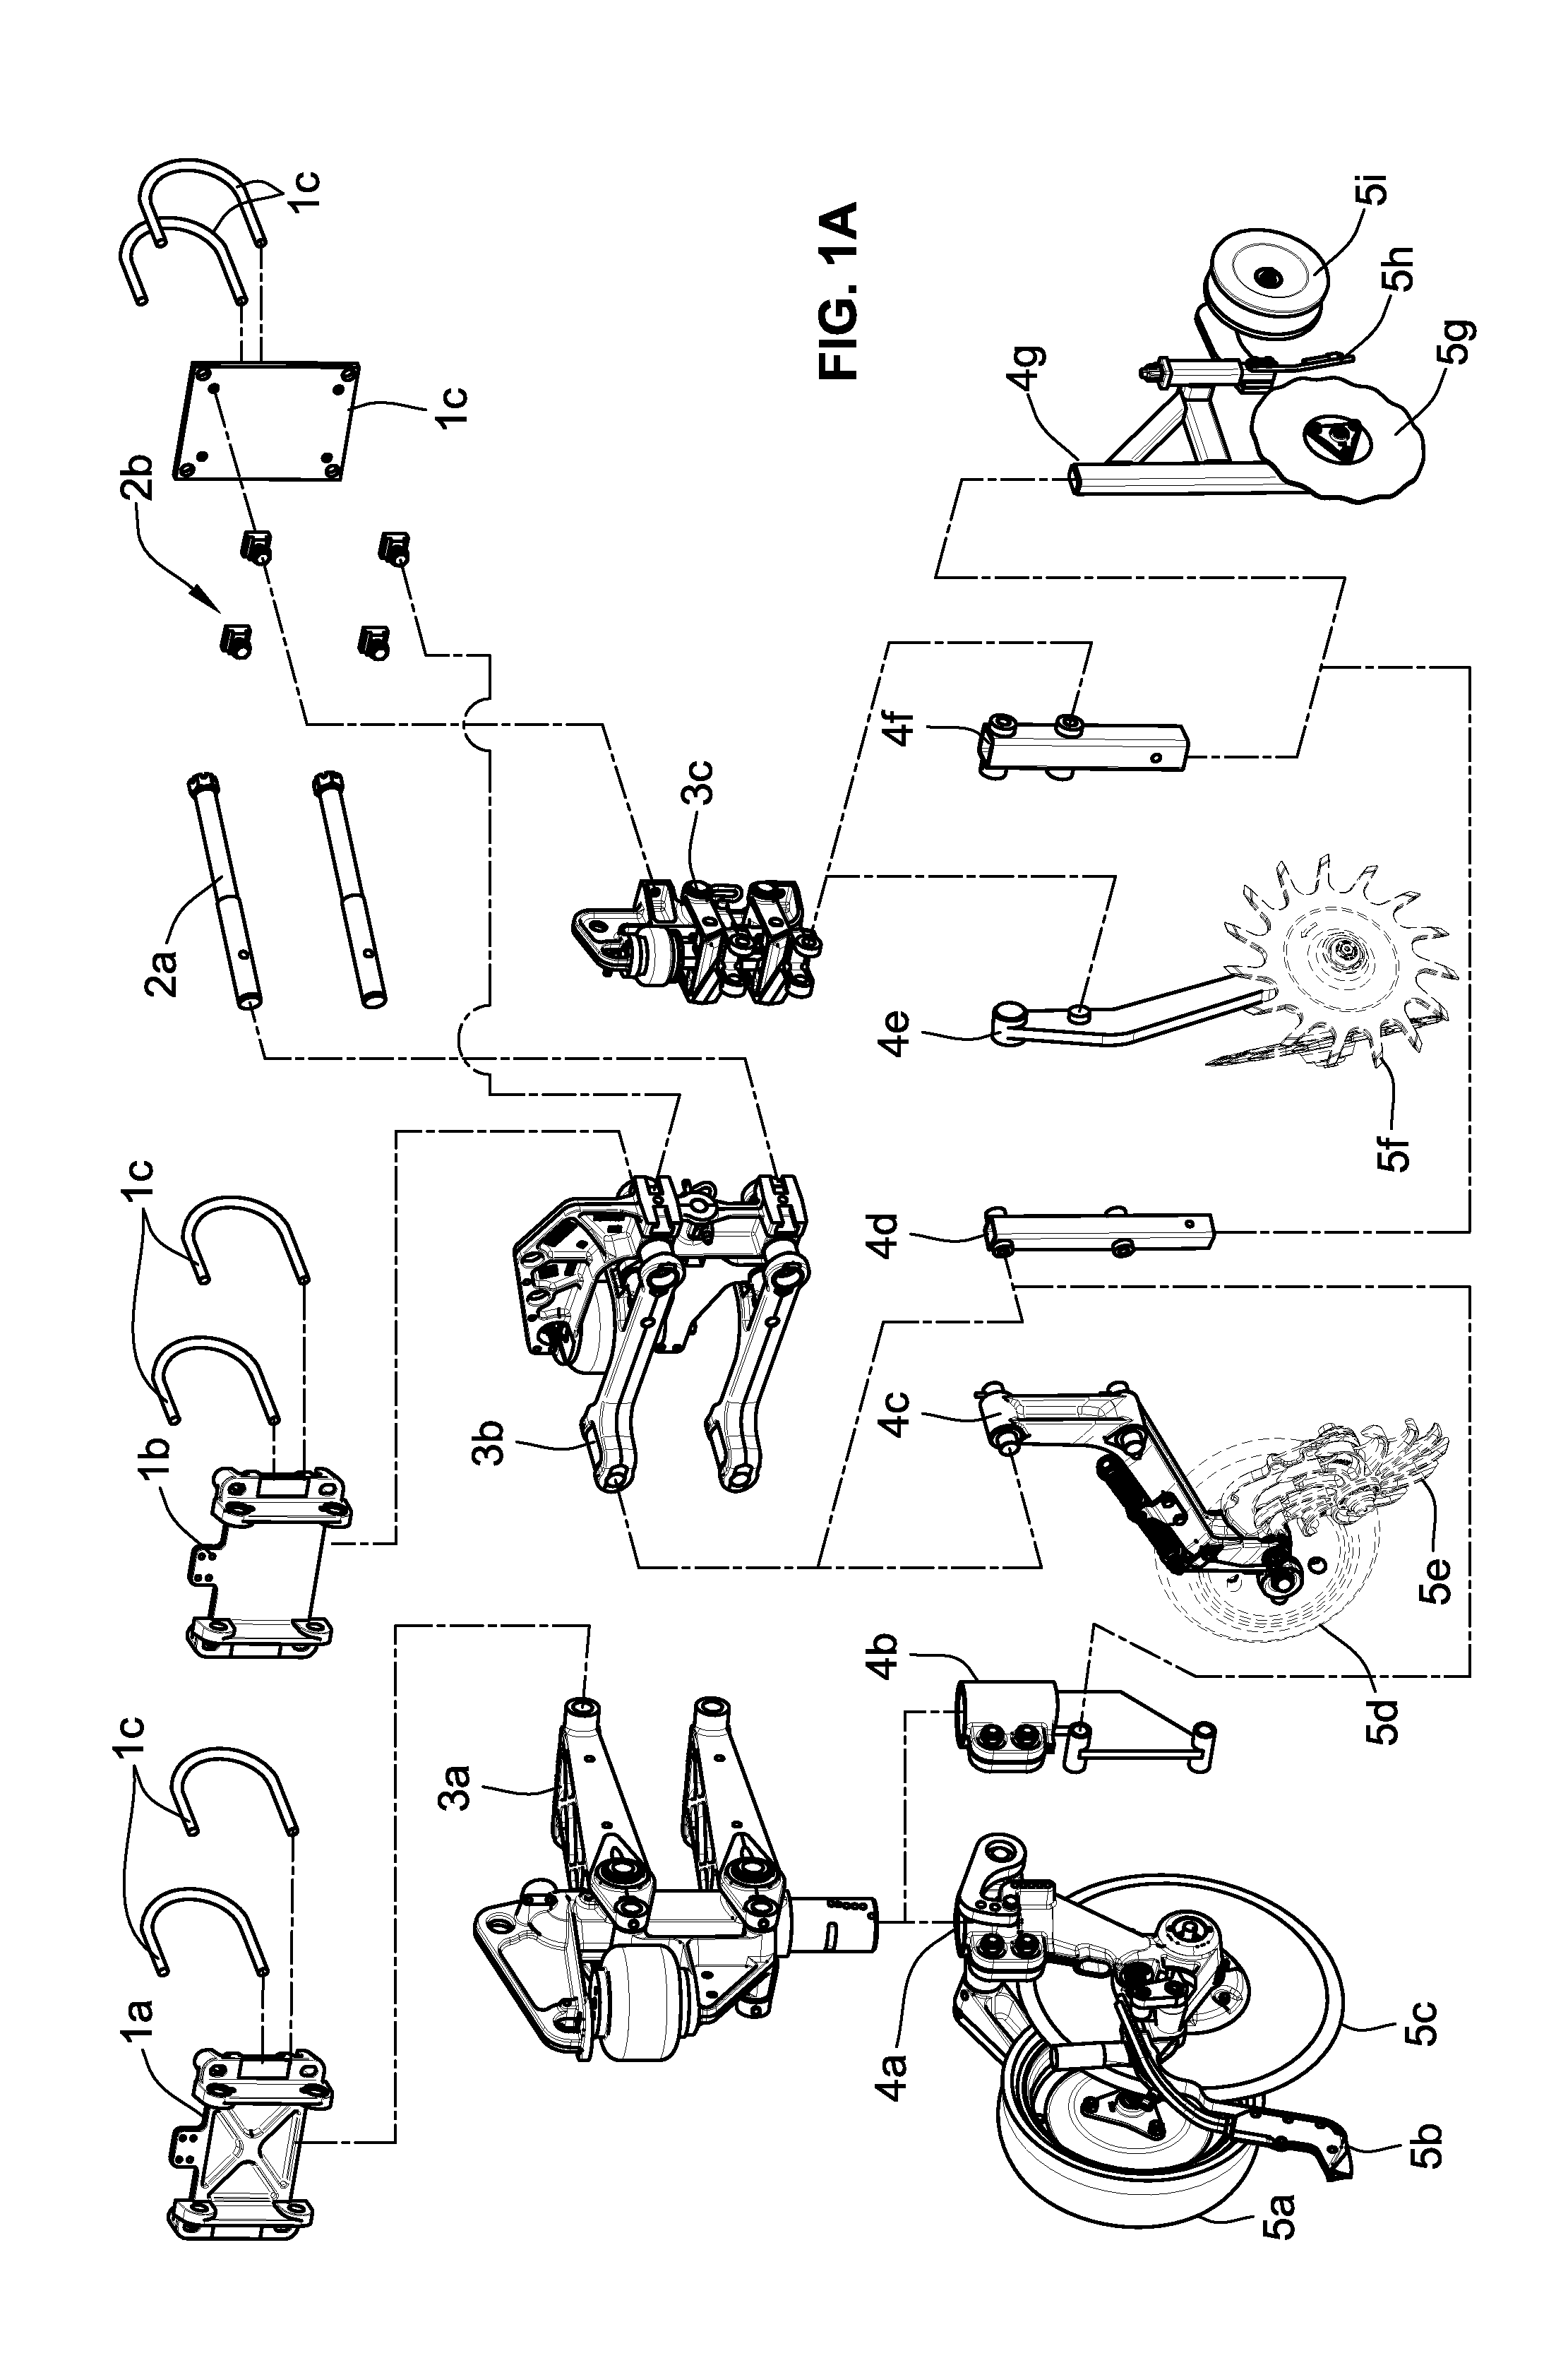 Agricultural implement kit